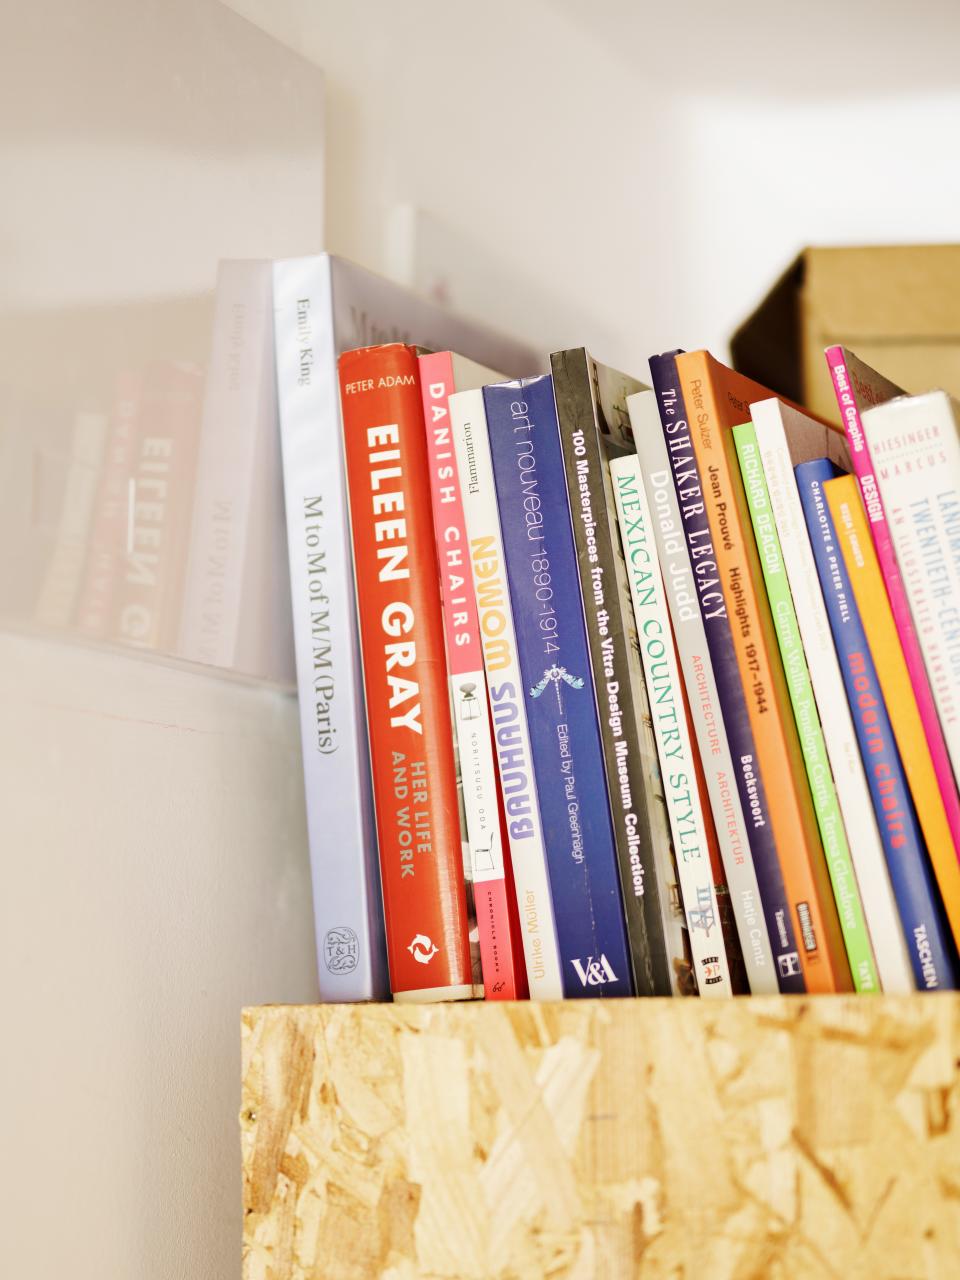 Colorful books on plywood shelves.